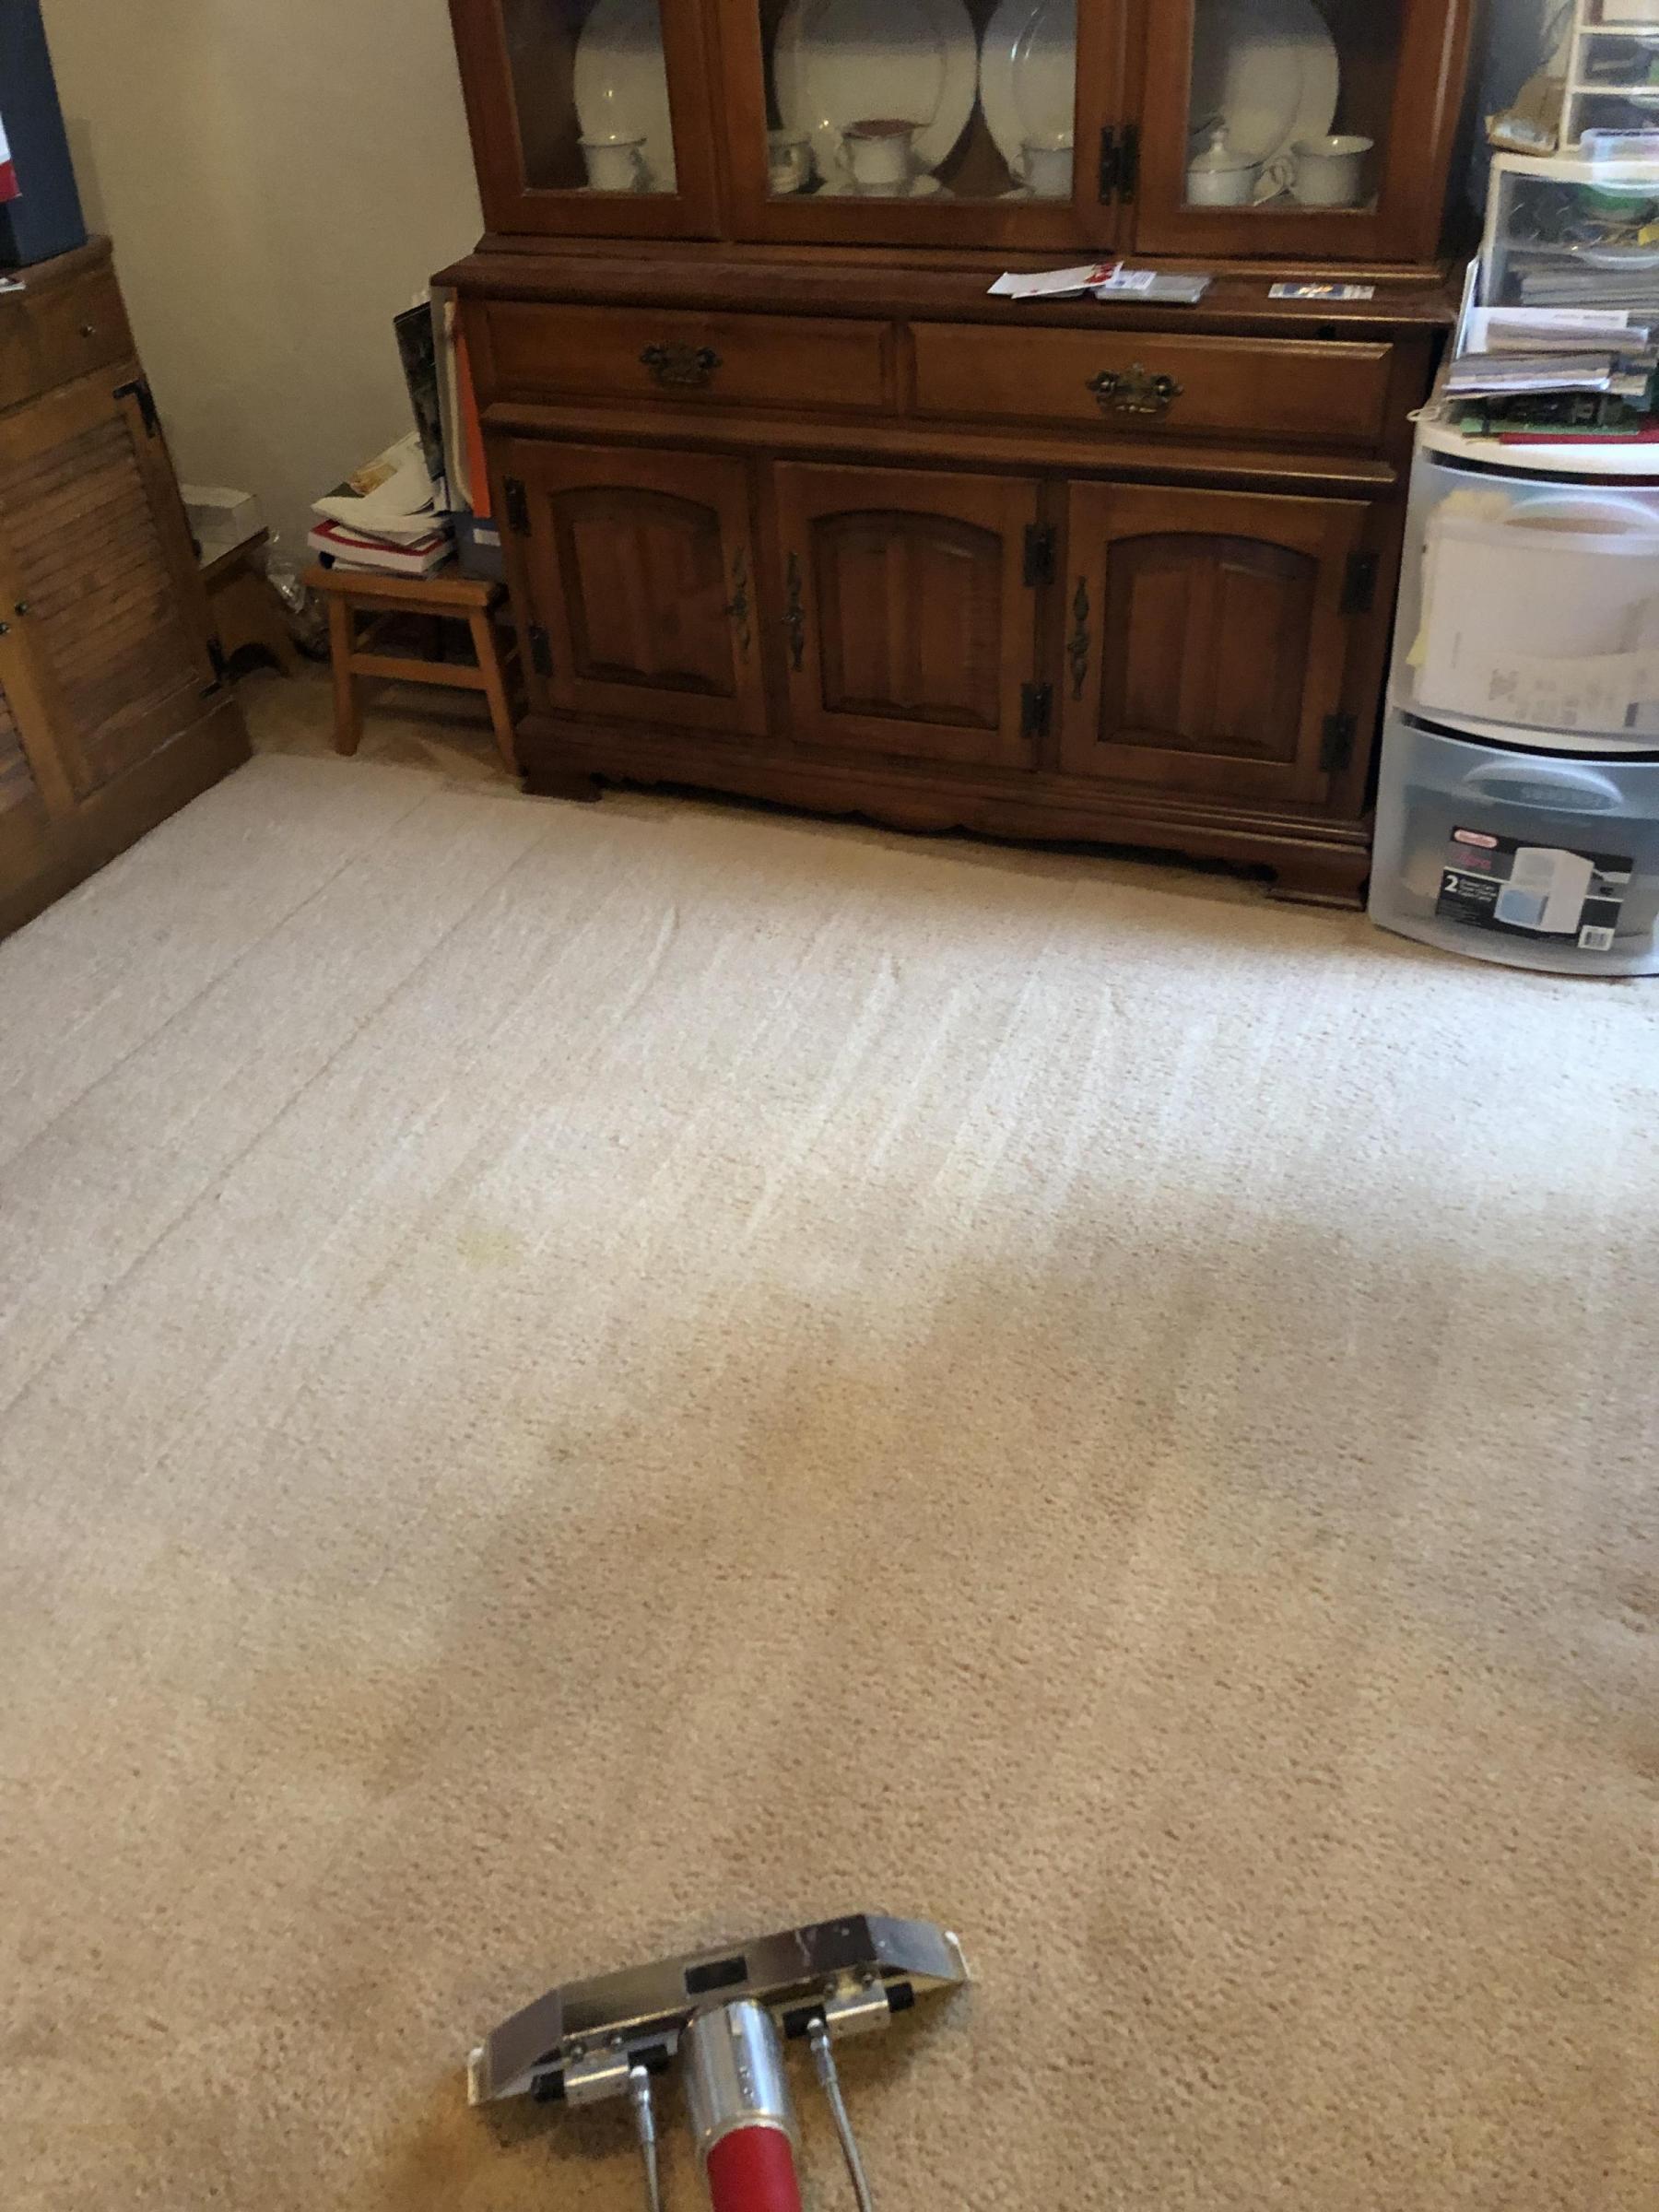 Prescott Valley Carpet Cleaning. Cleaning Takes How Long?